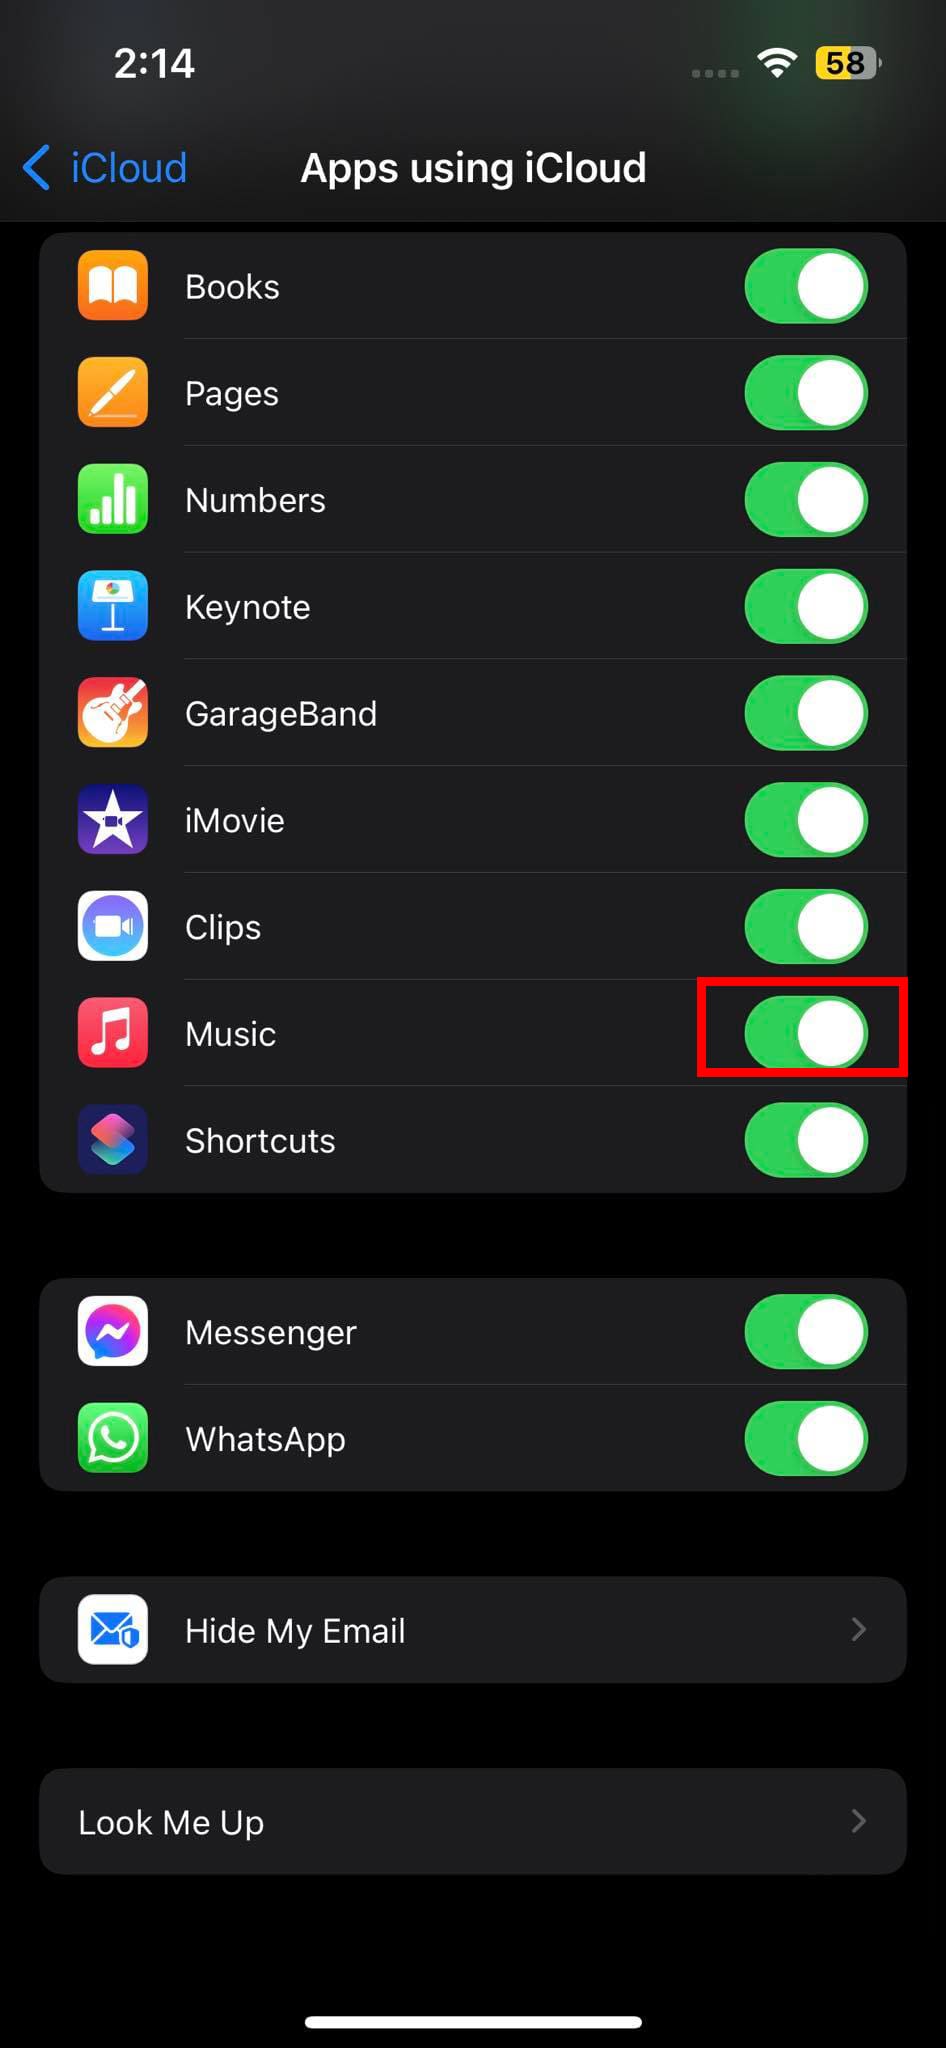 Toggle On and Off iCloud access of Apple Music app on an iPhone